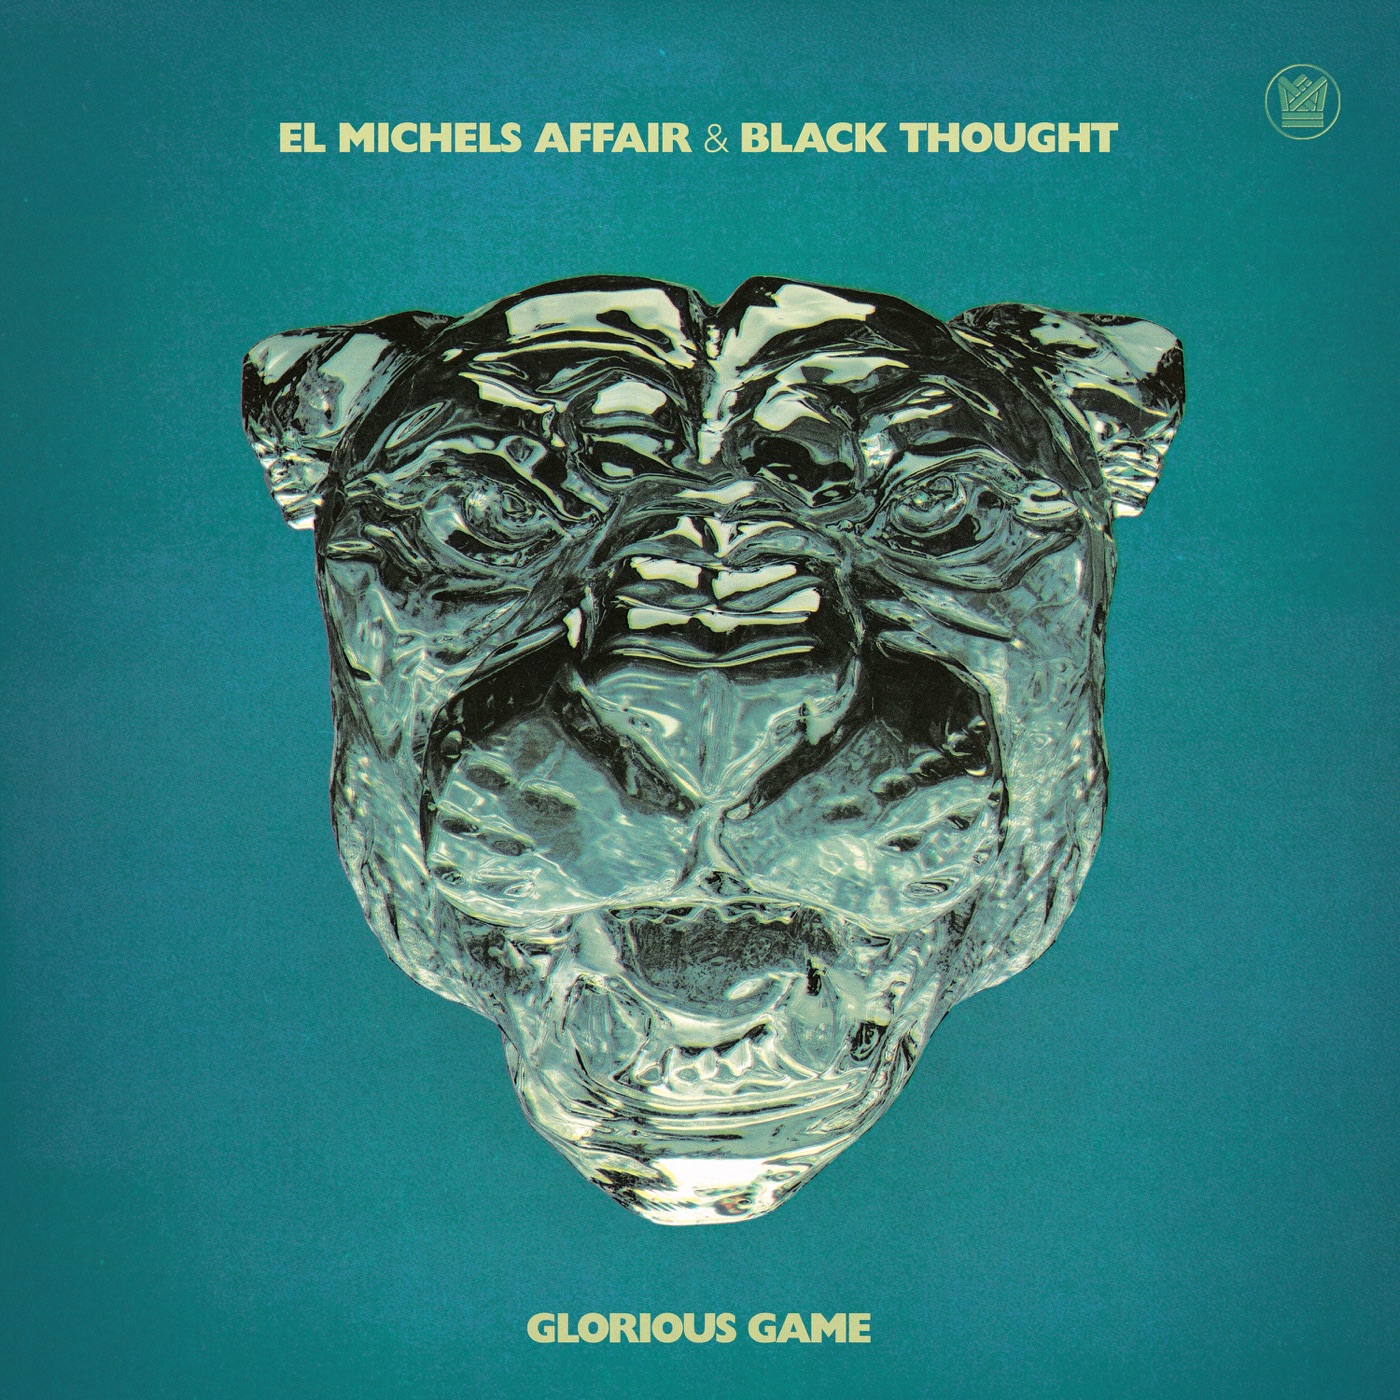 Glorious Game by El Michels Affair, Black Thought